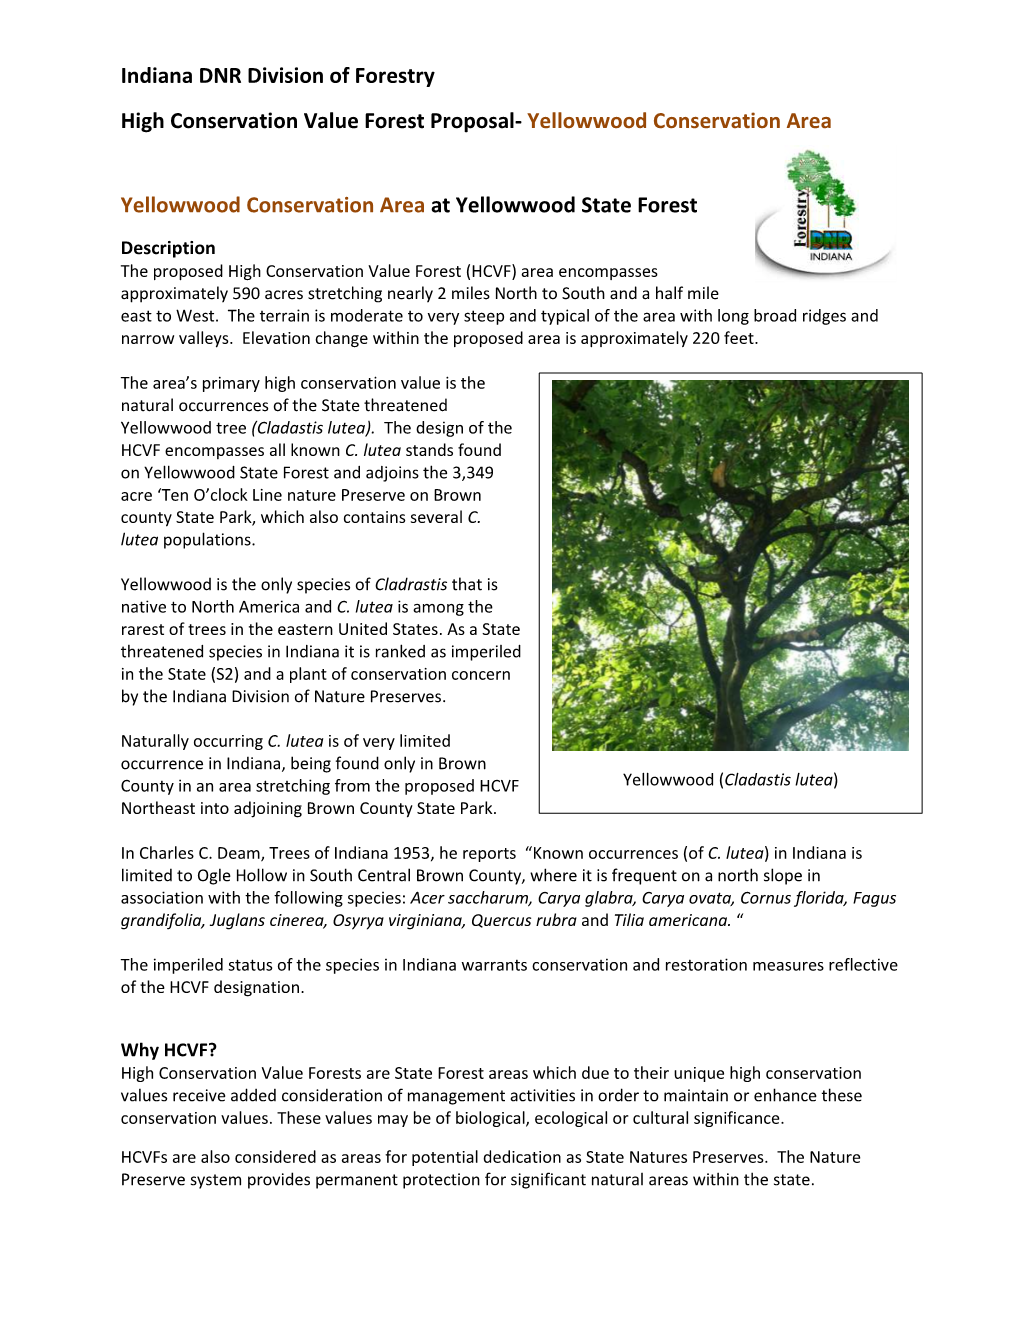 Indiana DNR Division of Forestry High Conservation Value Forest Proposal- Yellowwood Conservation Area